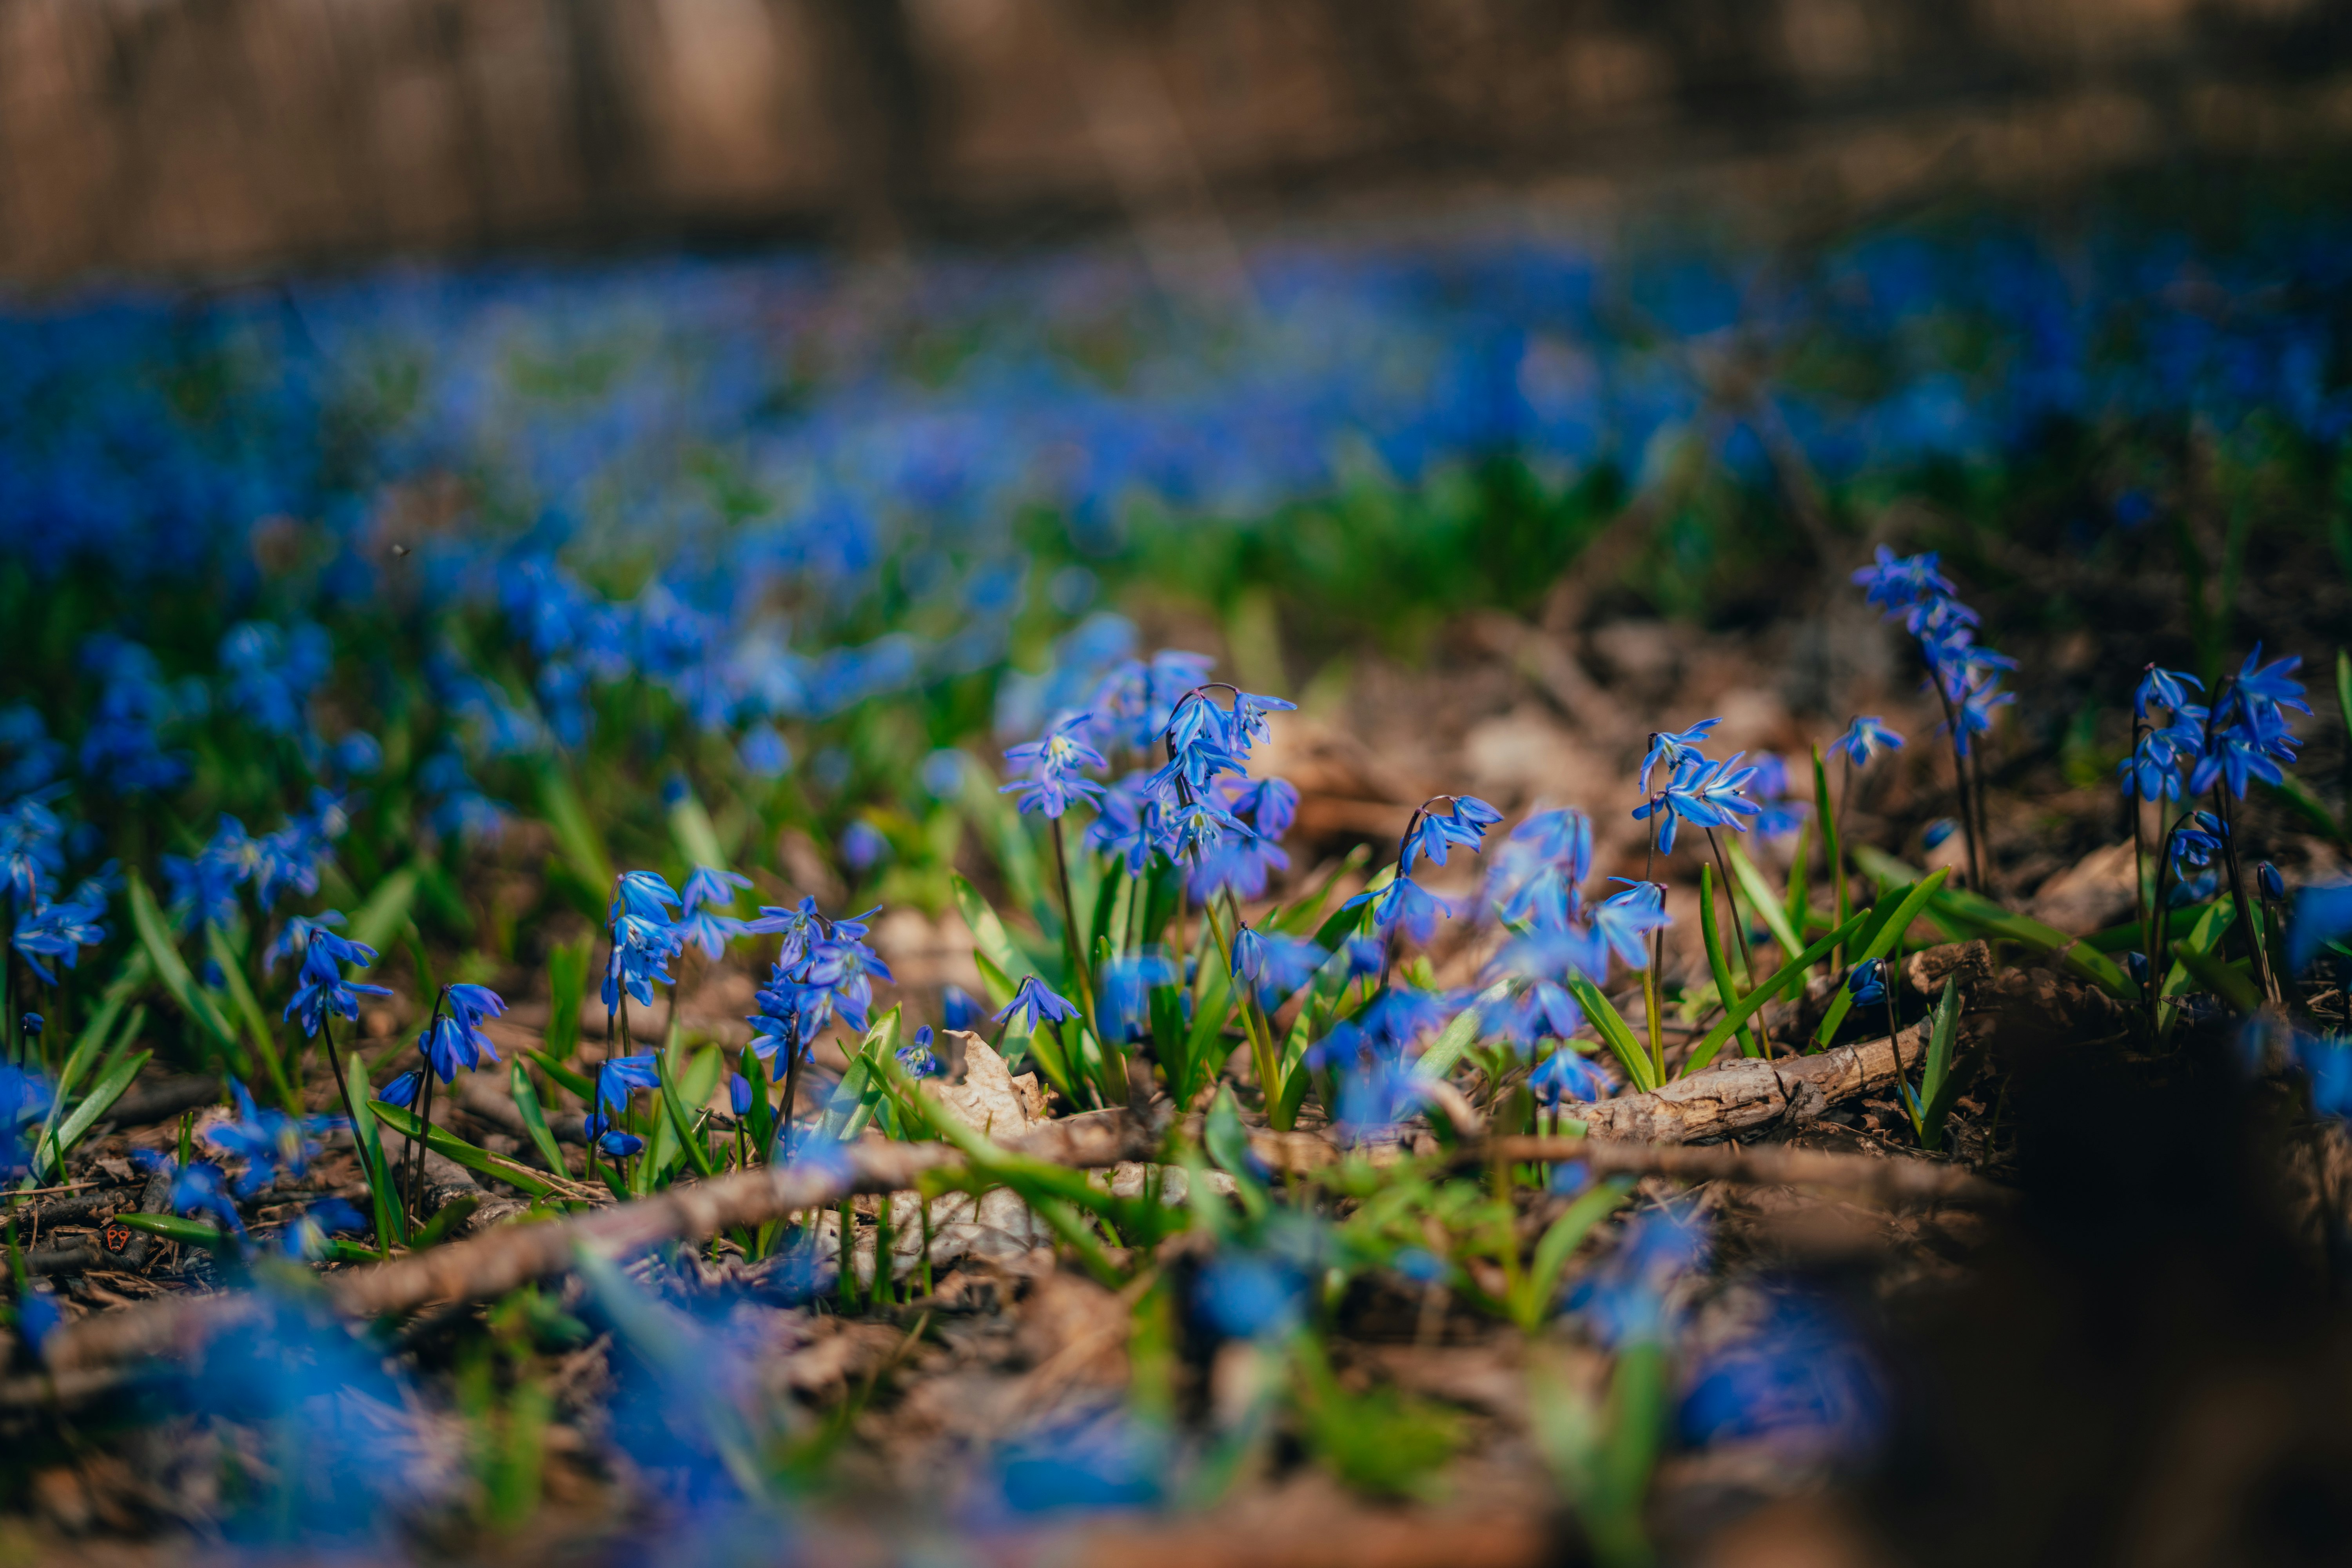 blue flowers on green grass during daytime